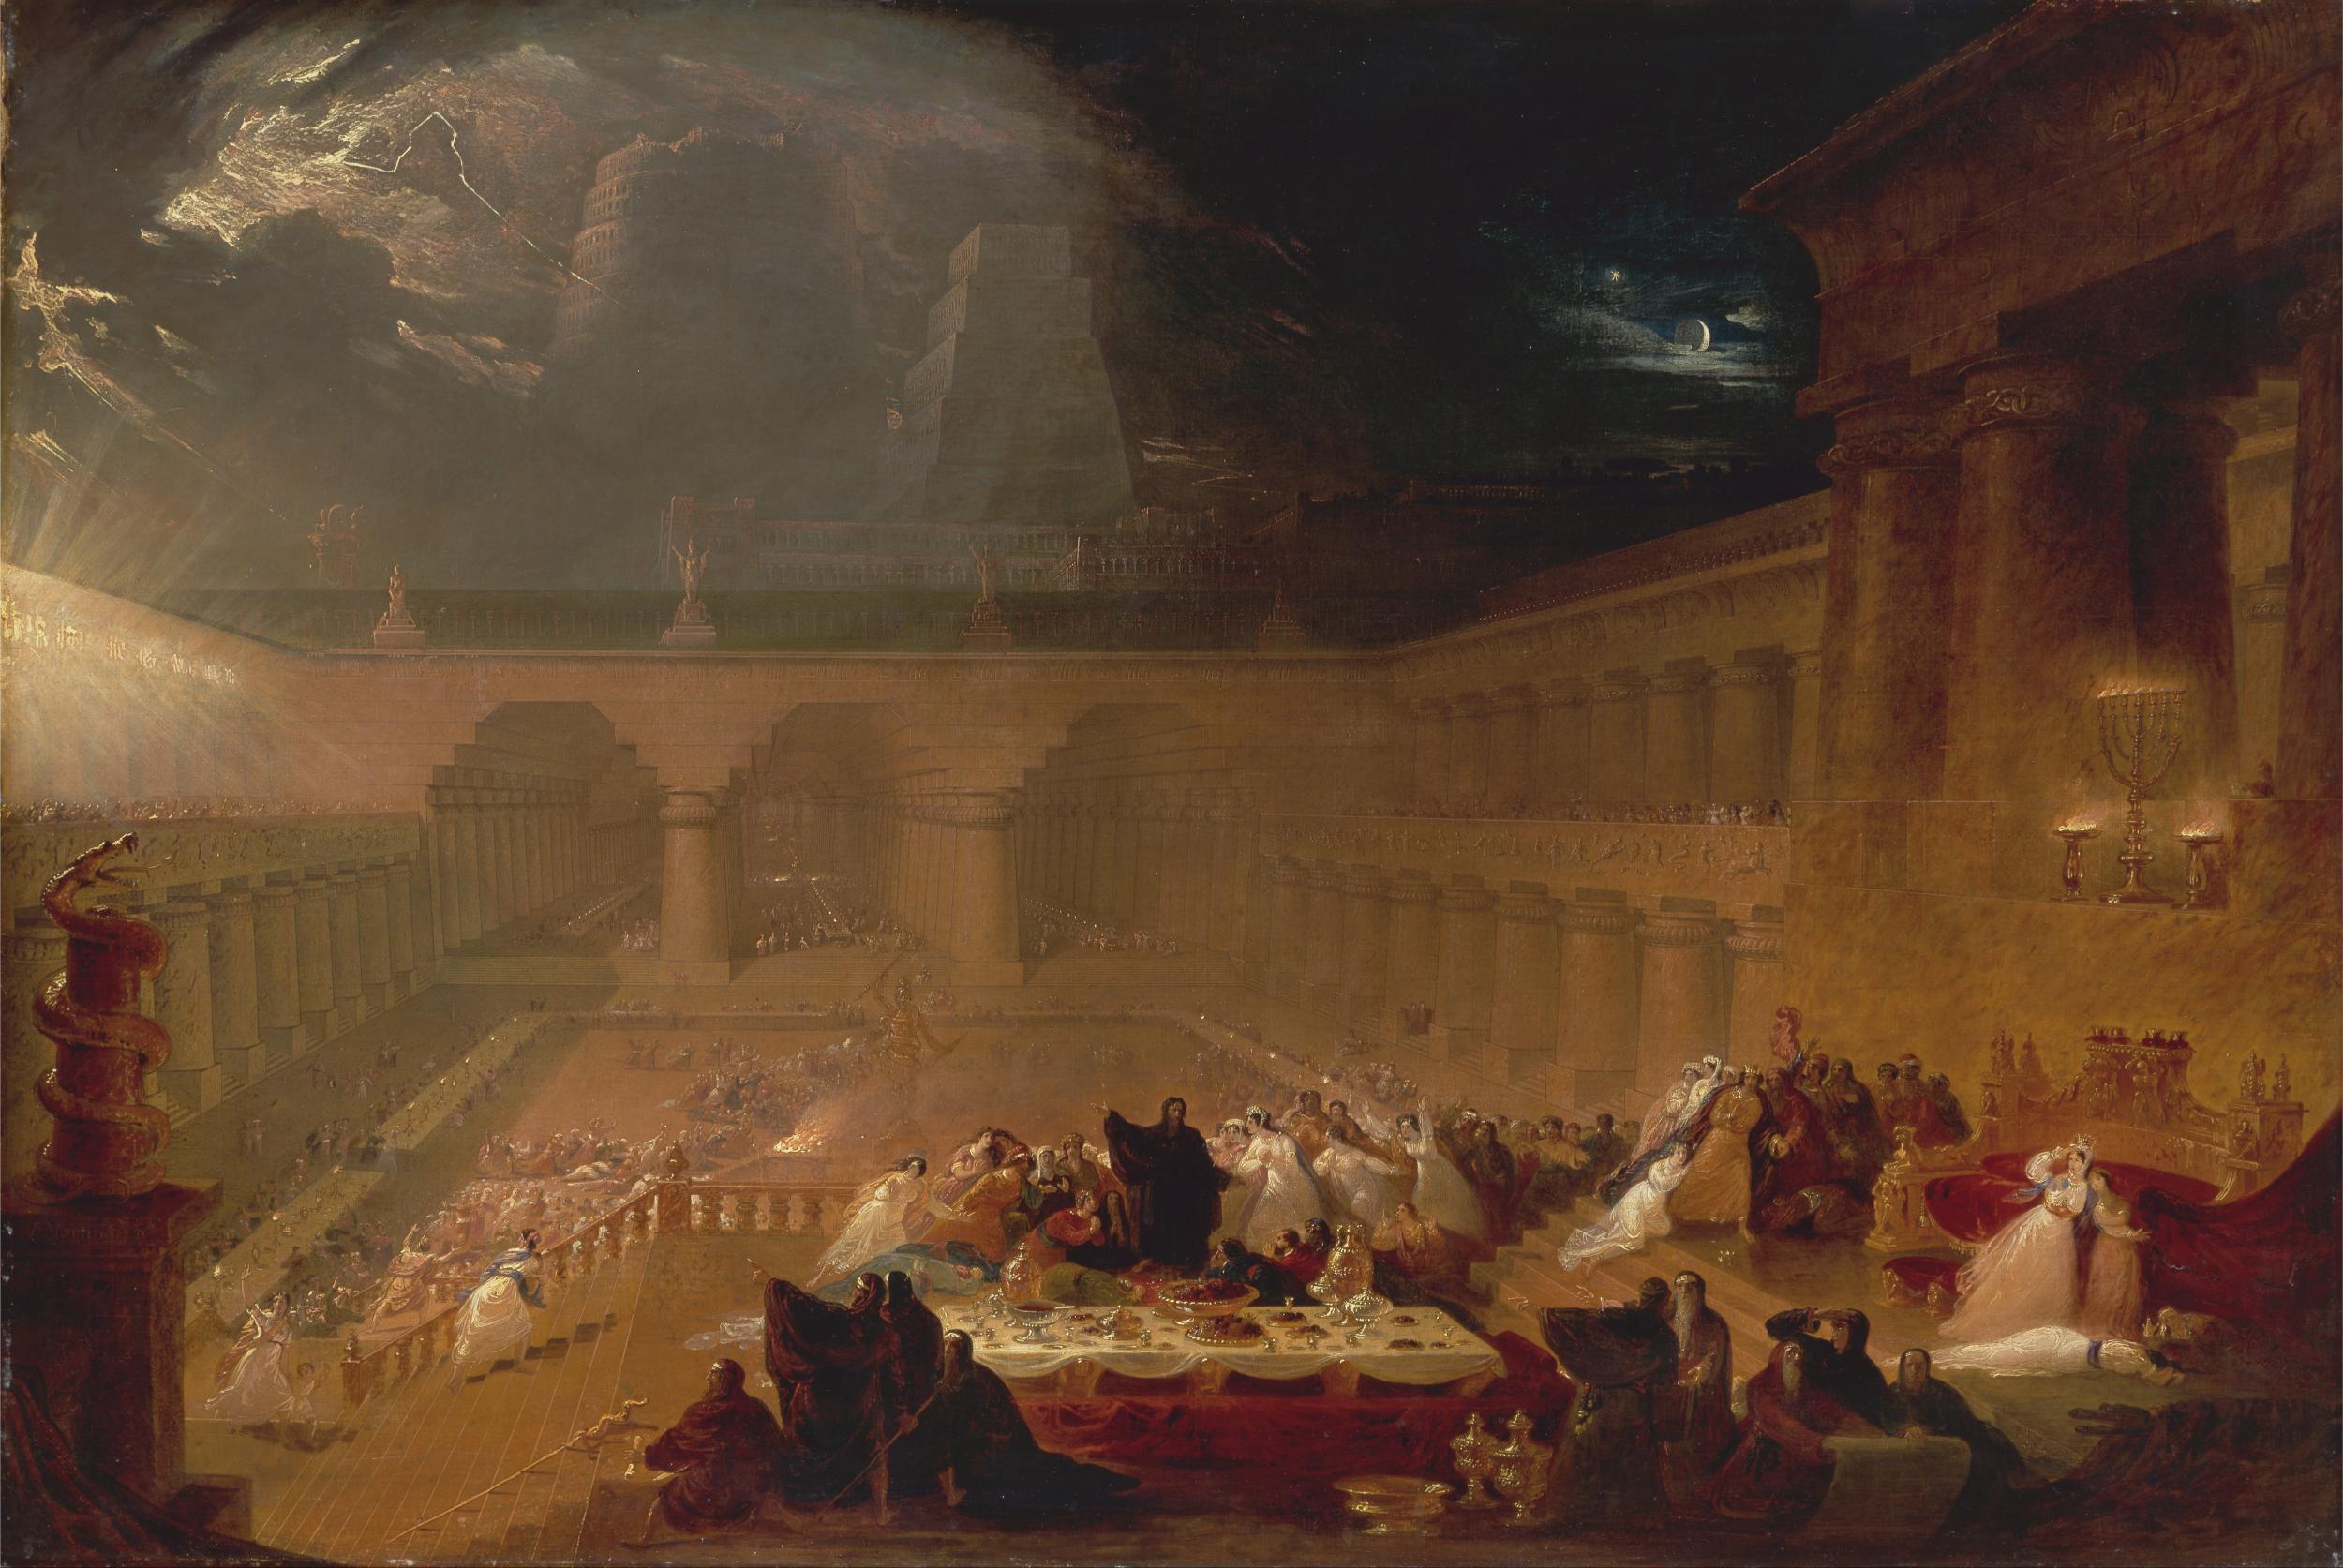 Belshazzar’s Feast, by John Martin, circa 1821. Poor Belshazzar could not have averted his doom, even if he had seen any graffiti